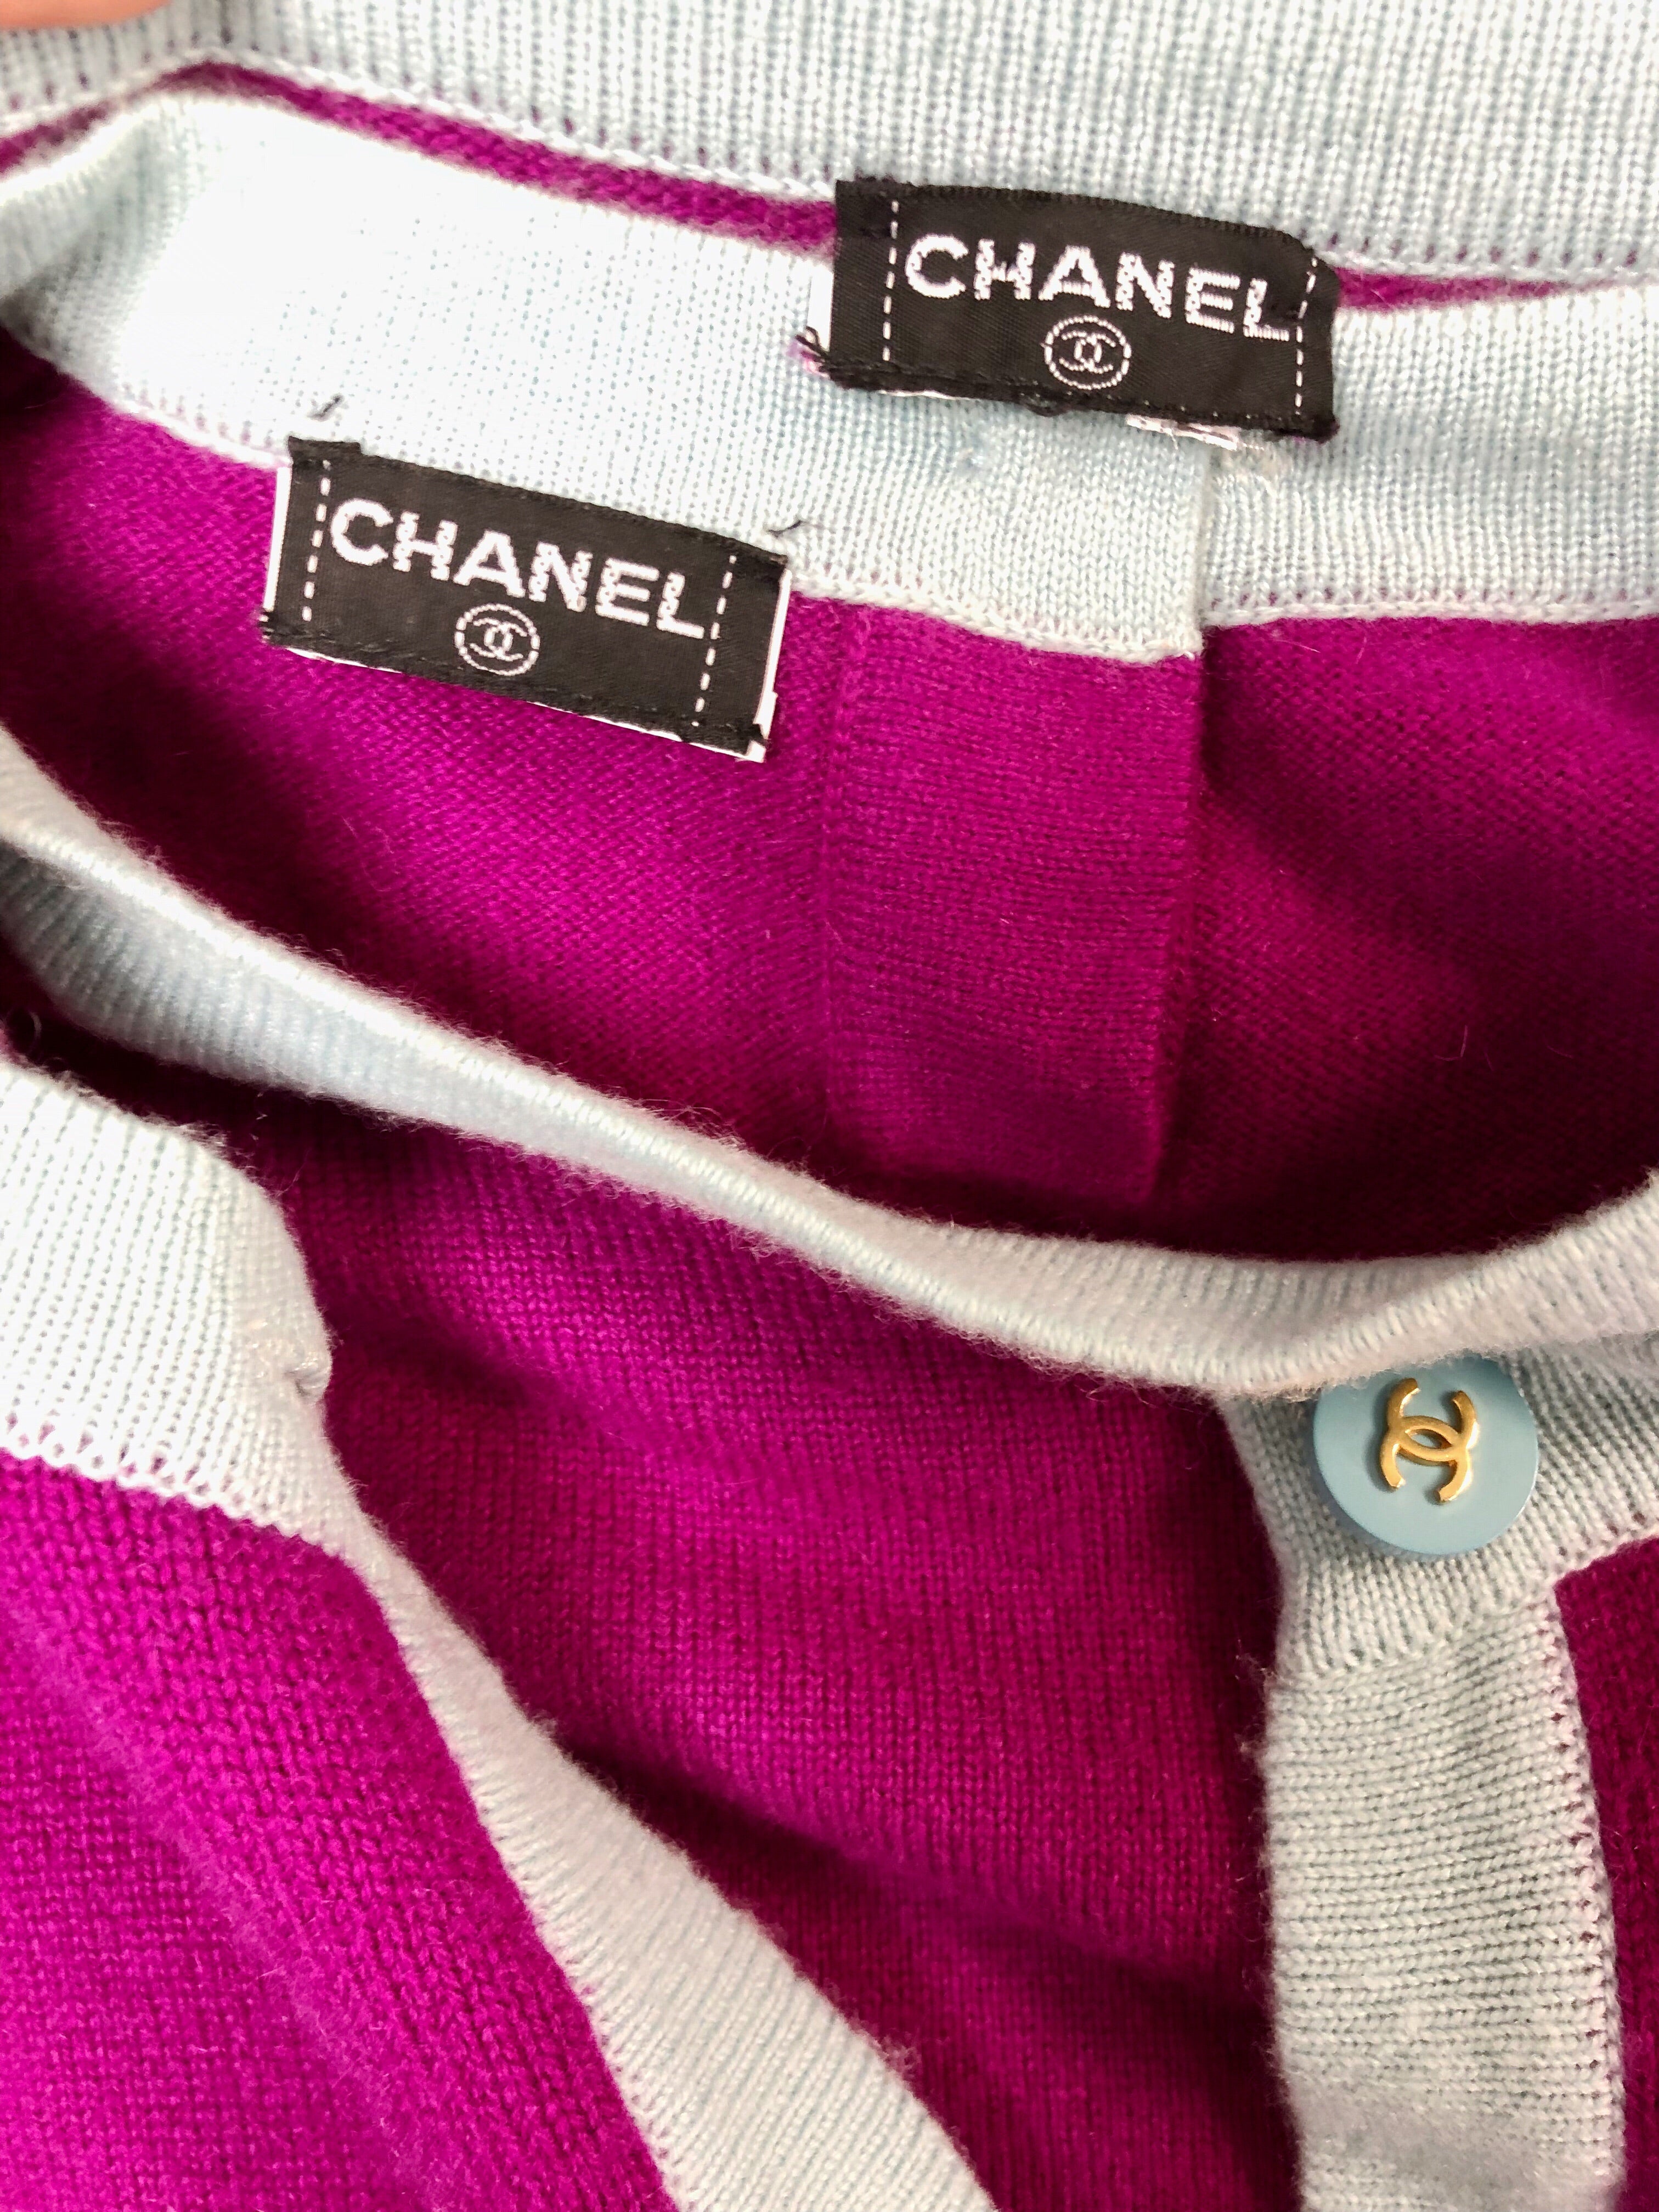 Chanel purple and blue cashmere sweater set – Dina C's Fab and Funky  Consignment Boutique